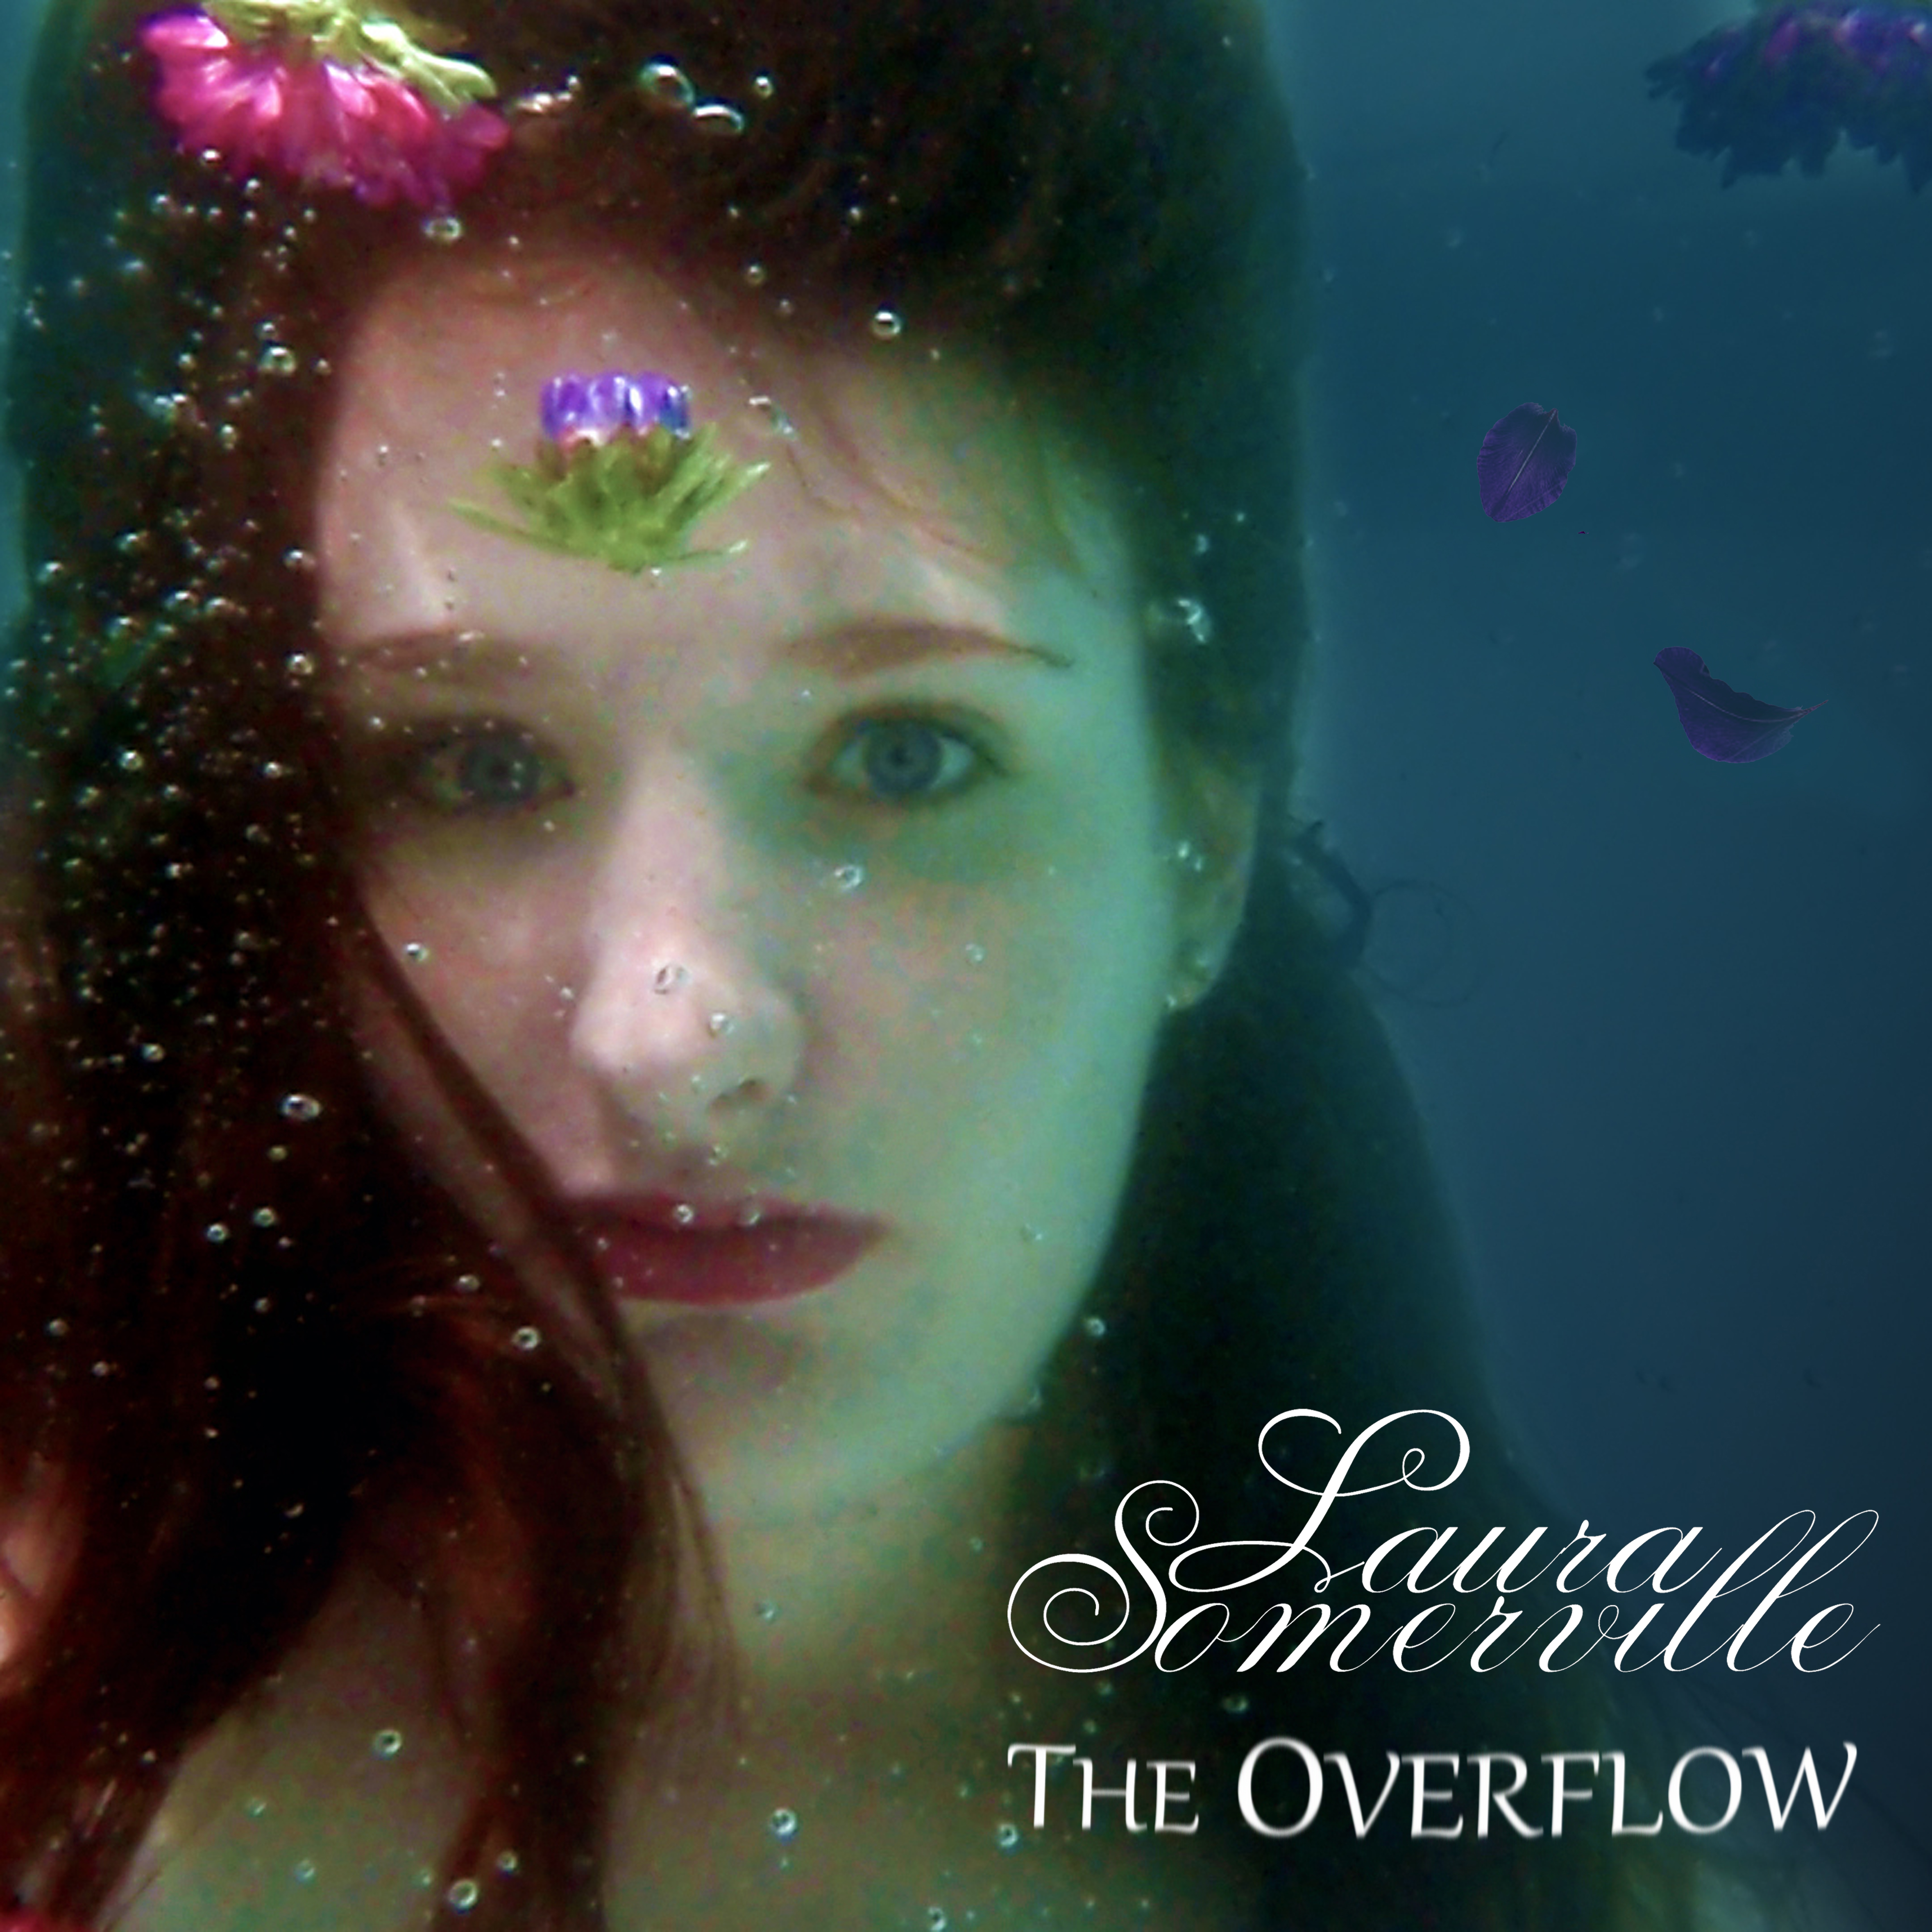 The Overflow By Laura Somerville - http://vimeo.com/laurasomerville/theoverflow